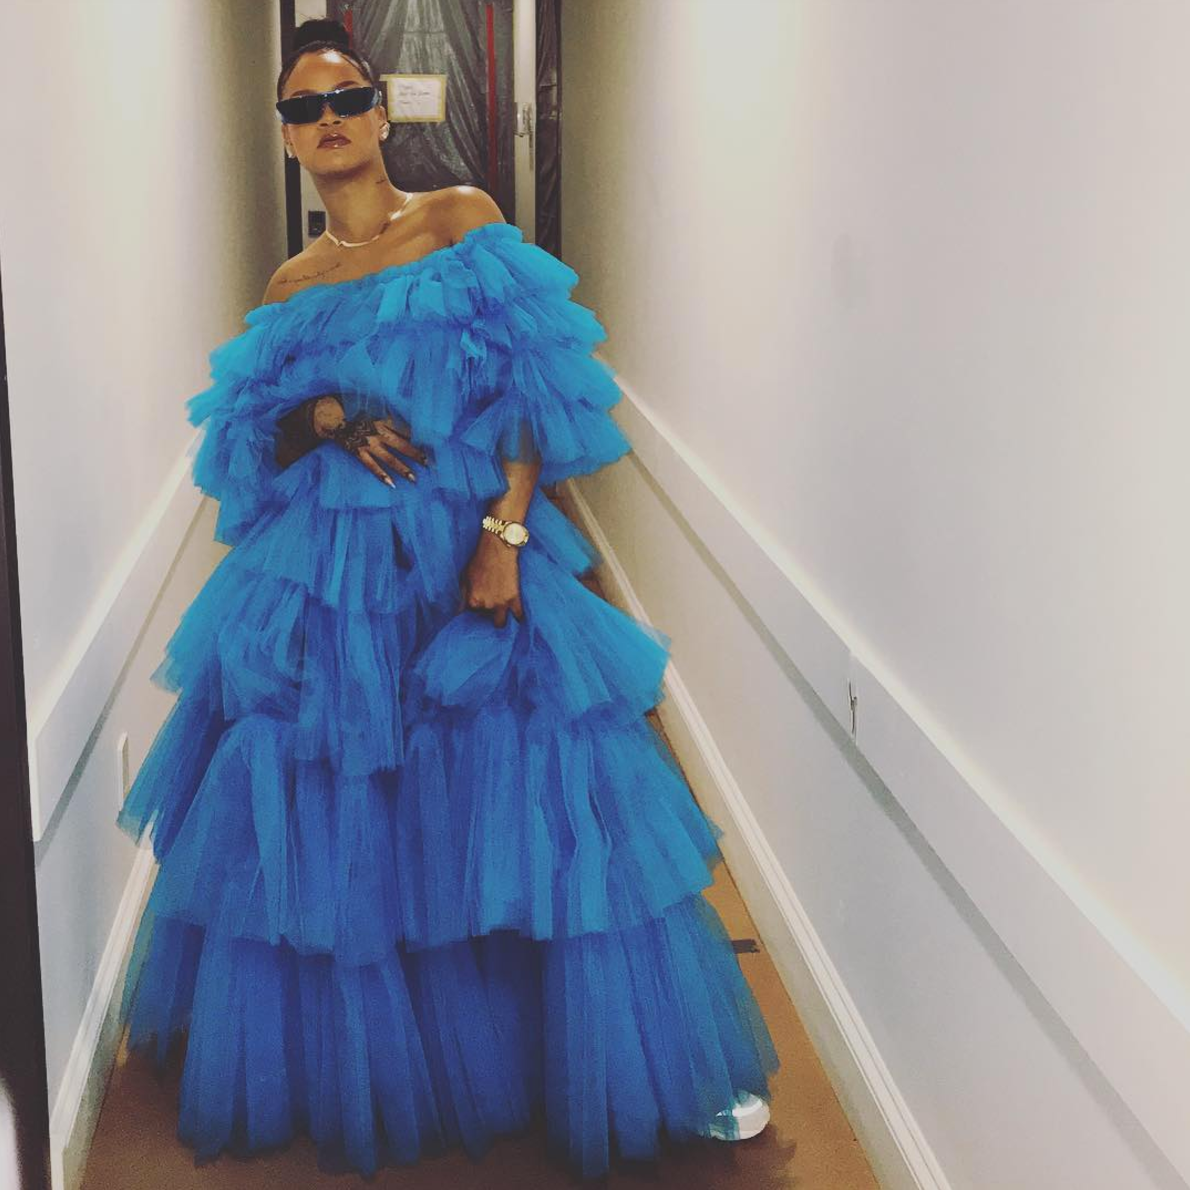 17 Times Rihanna Proved She's The Baddest Gal In 2017
